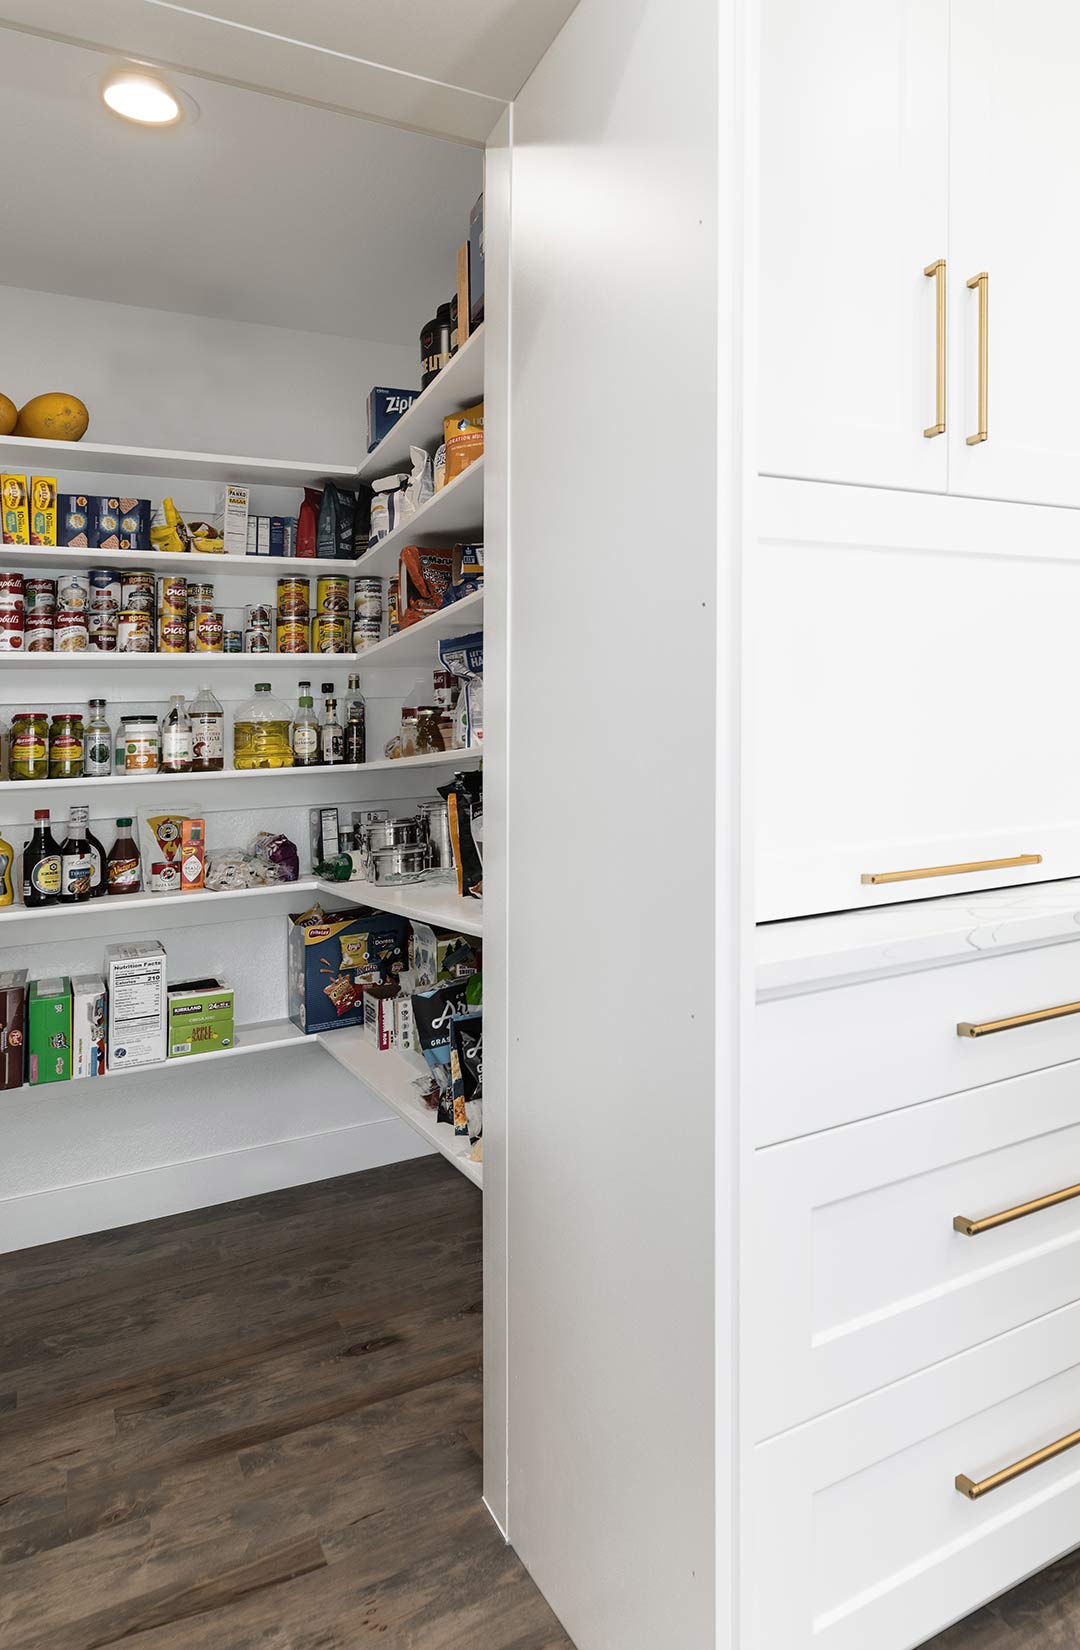 A hidden pantry in this modern transitional kitchen shows a glimpse of the family's food storage